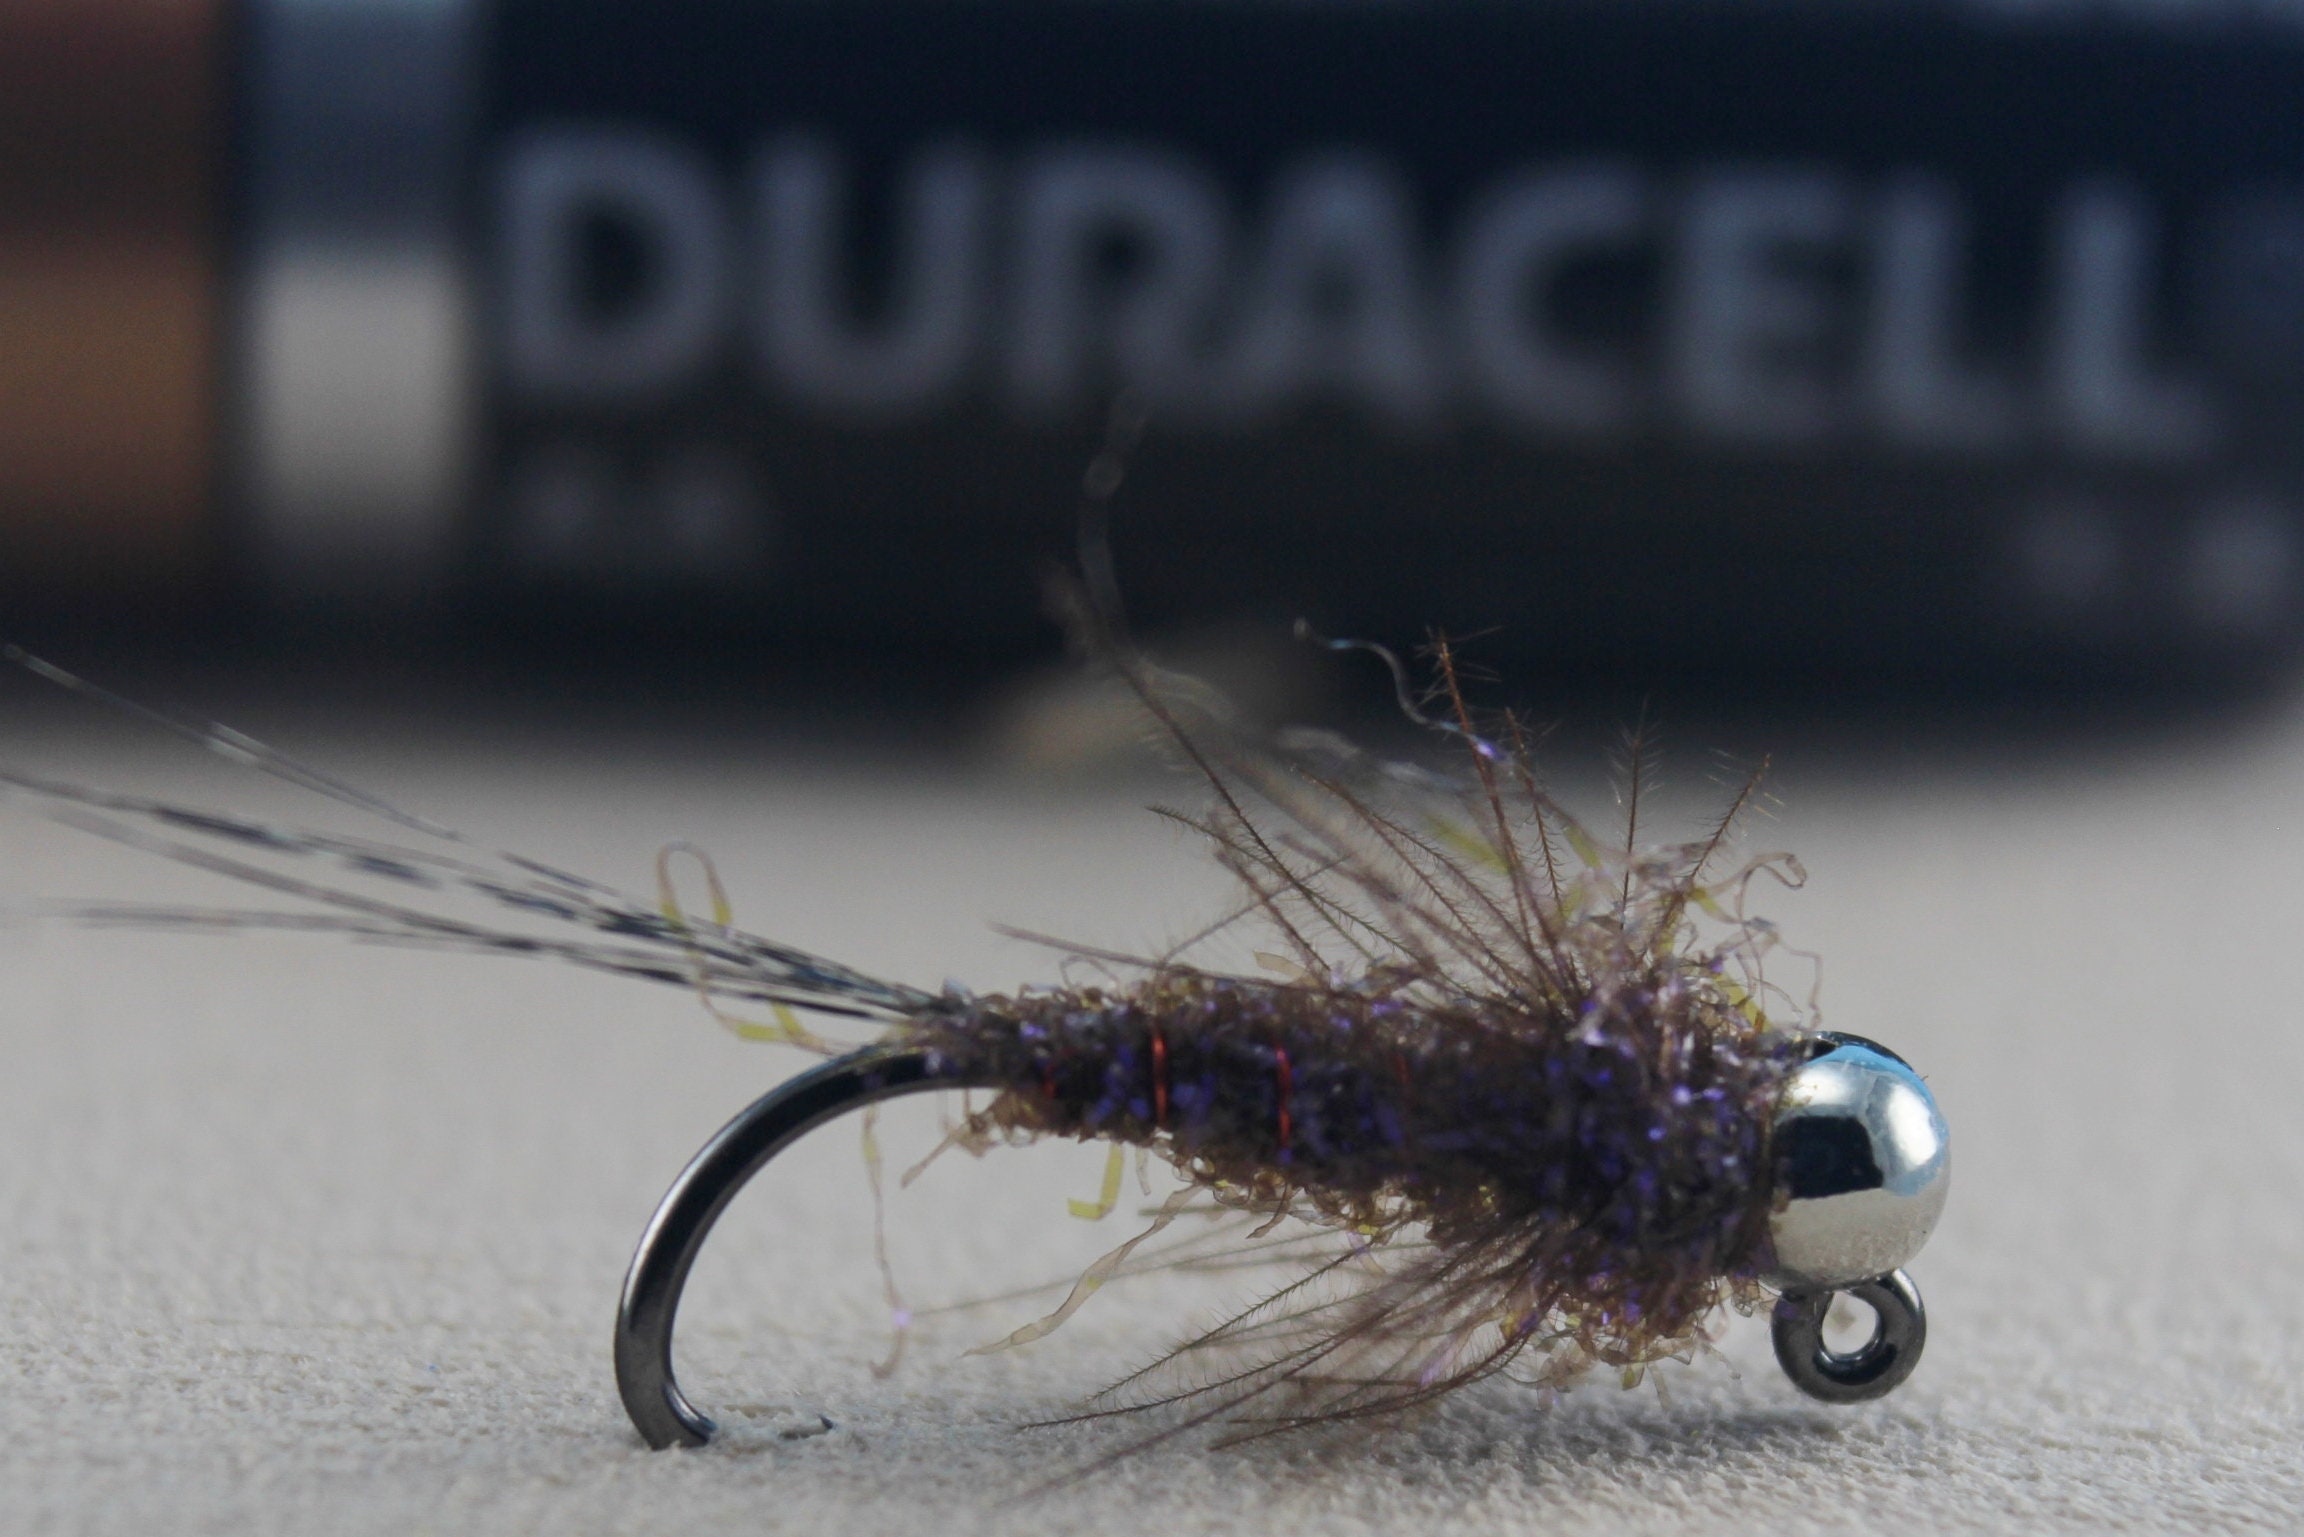 Duracell Jig Fly, 3 Pack Nymph Flies, Barbless Fly, Hand Tied Flies,  Tungsten Nymphs, Trout Flies, Bead Head Nymph -  Norway